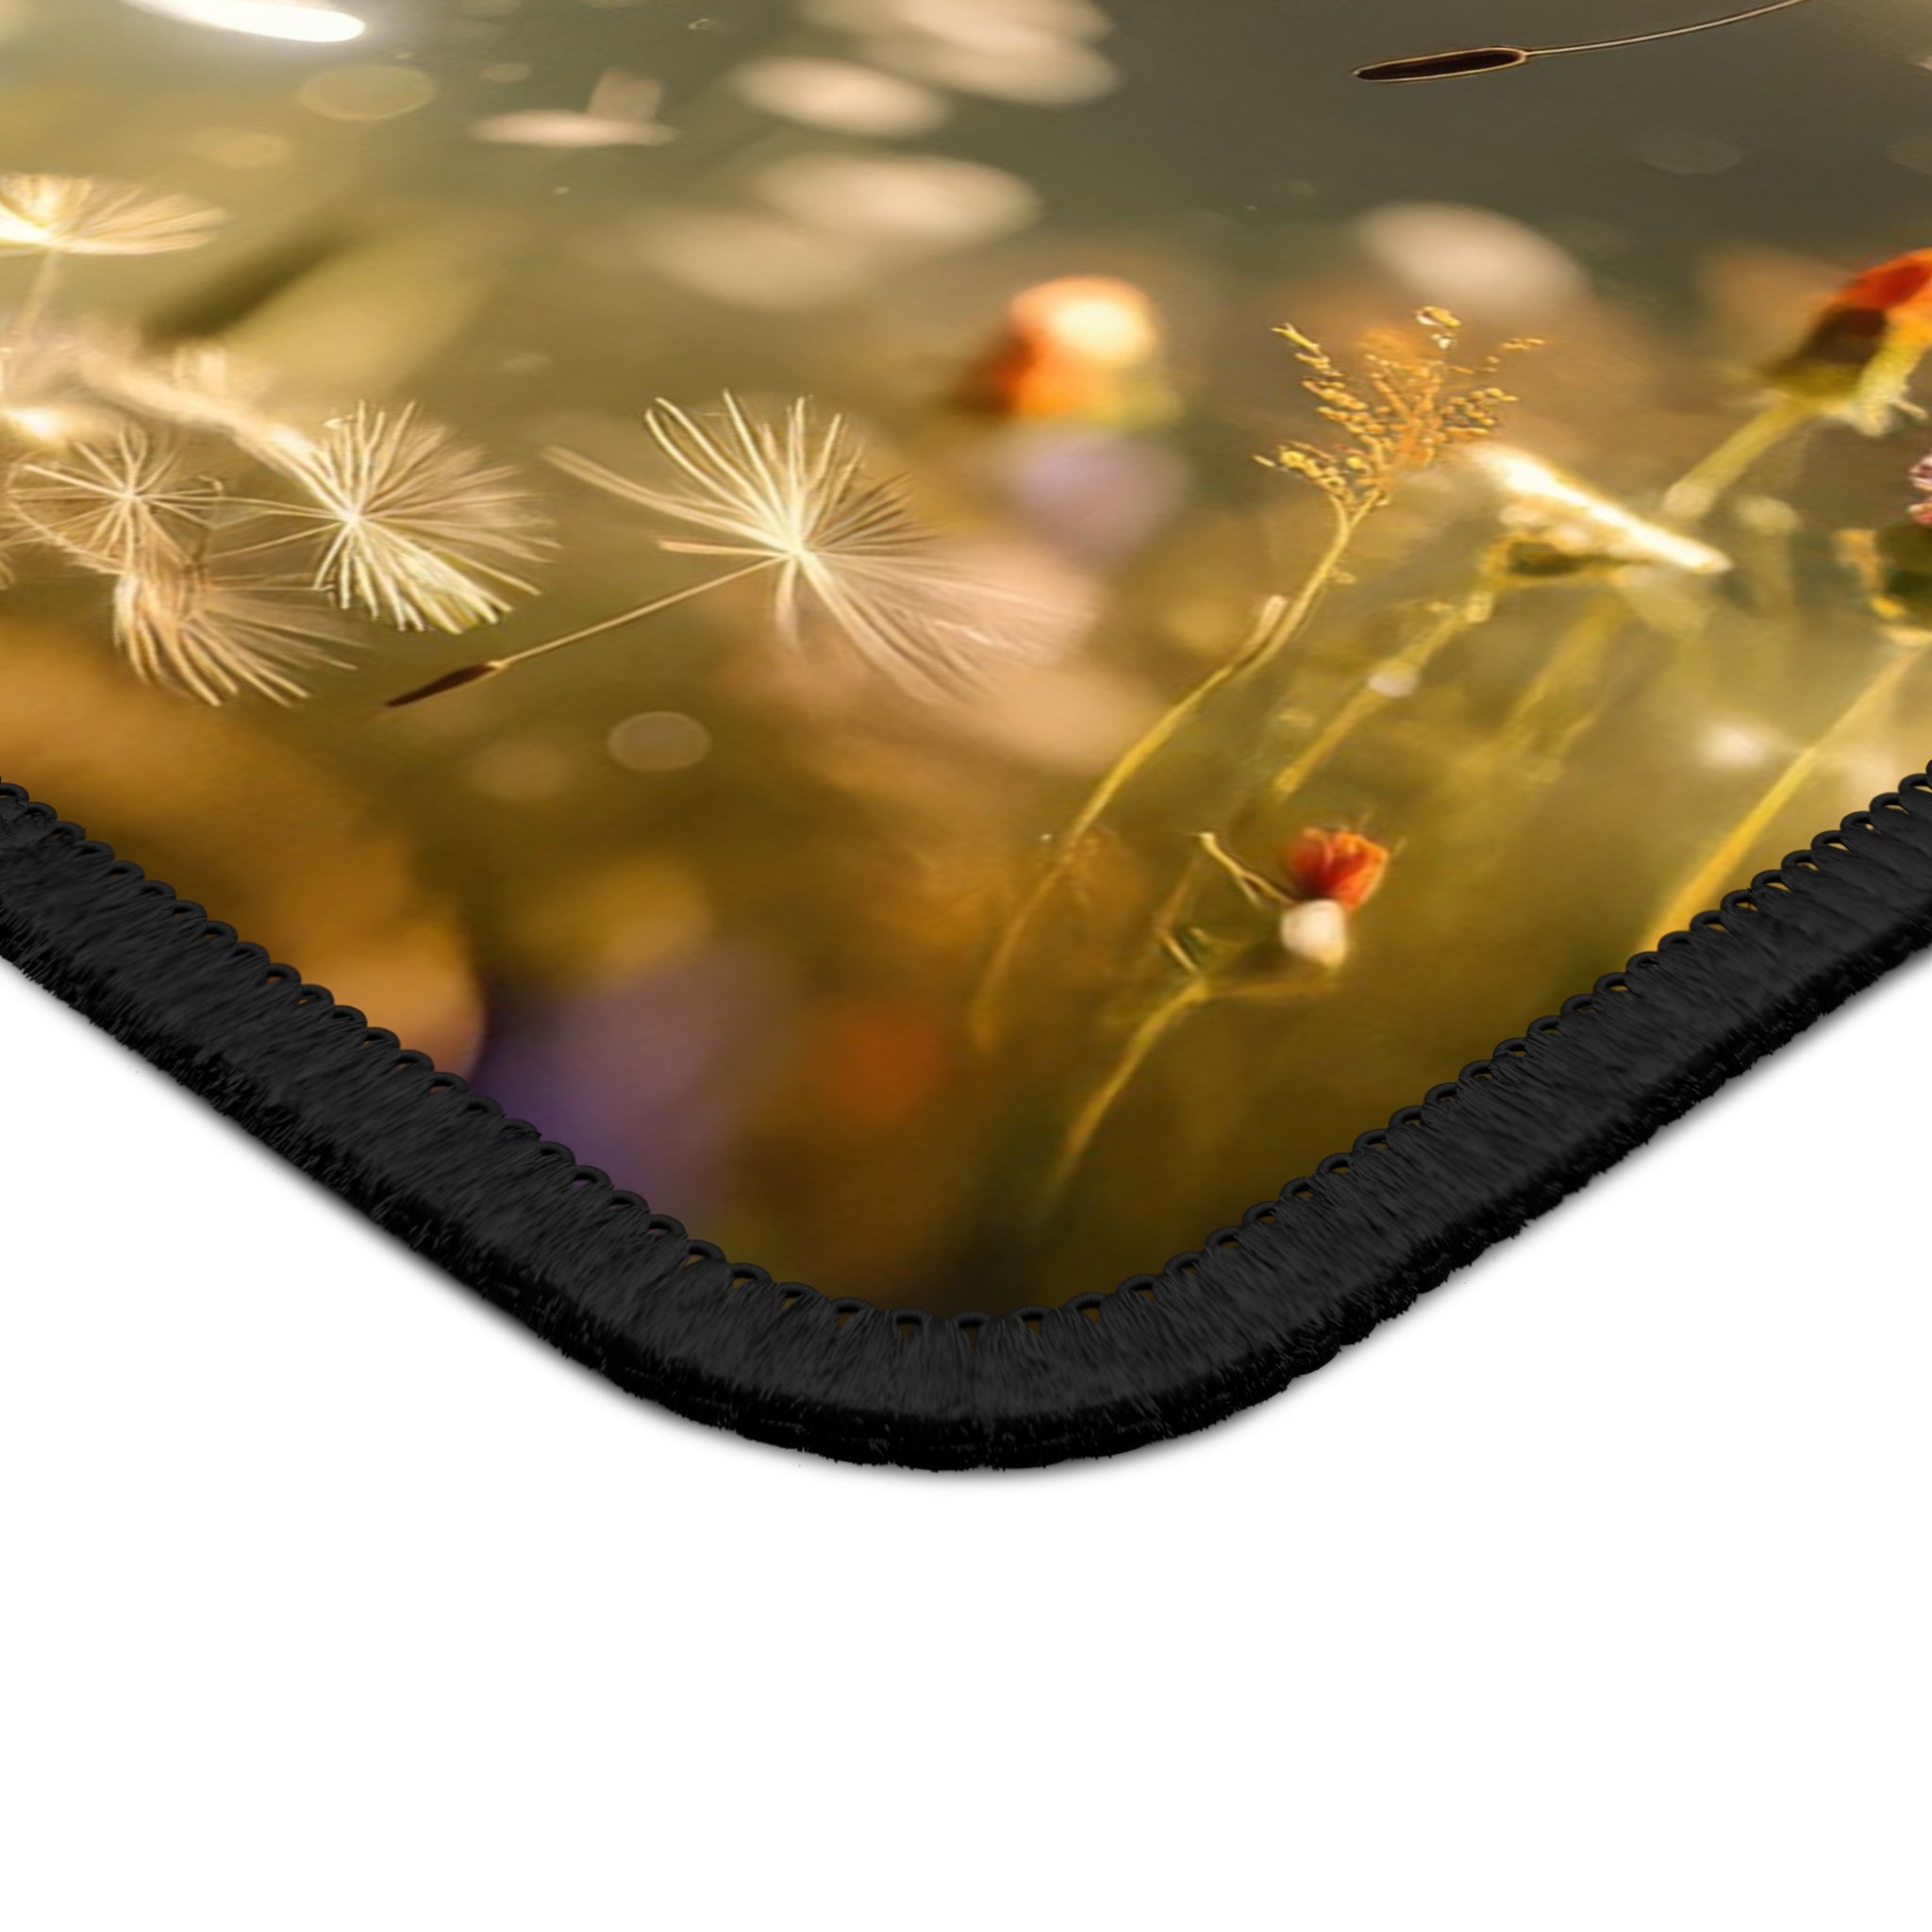 The Delicate Dance of the Dandelion Fae Mouse Pad